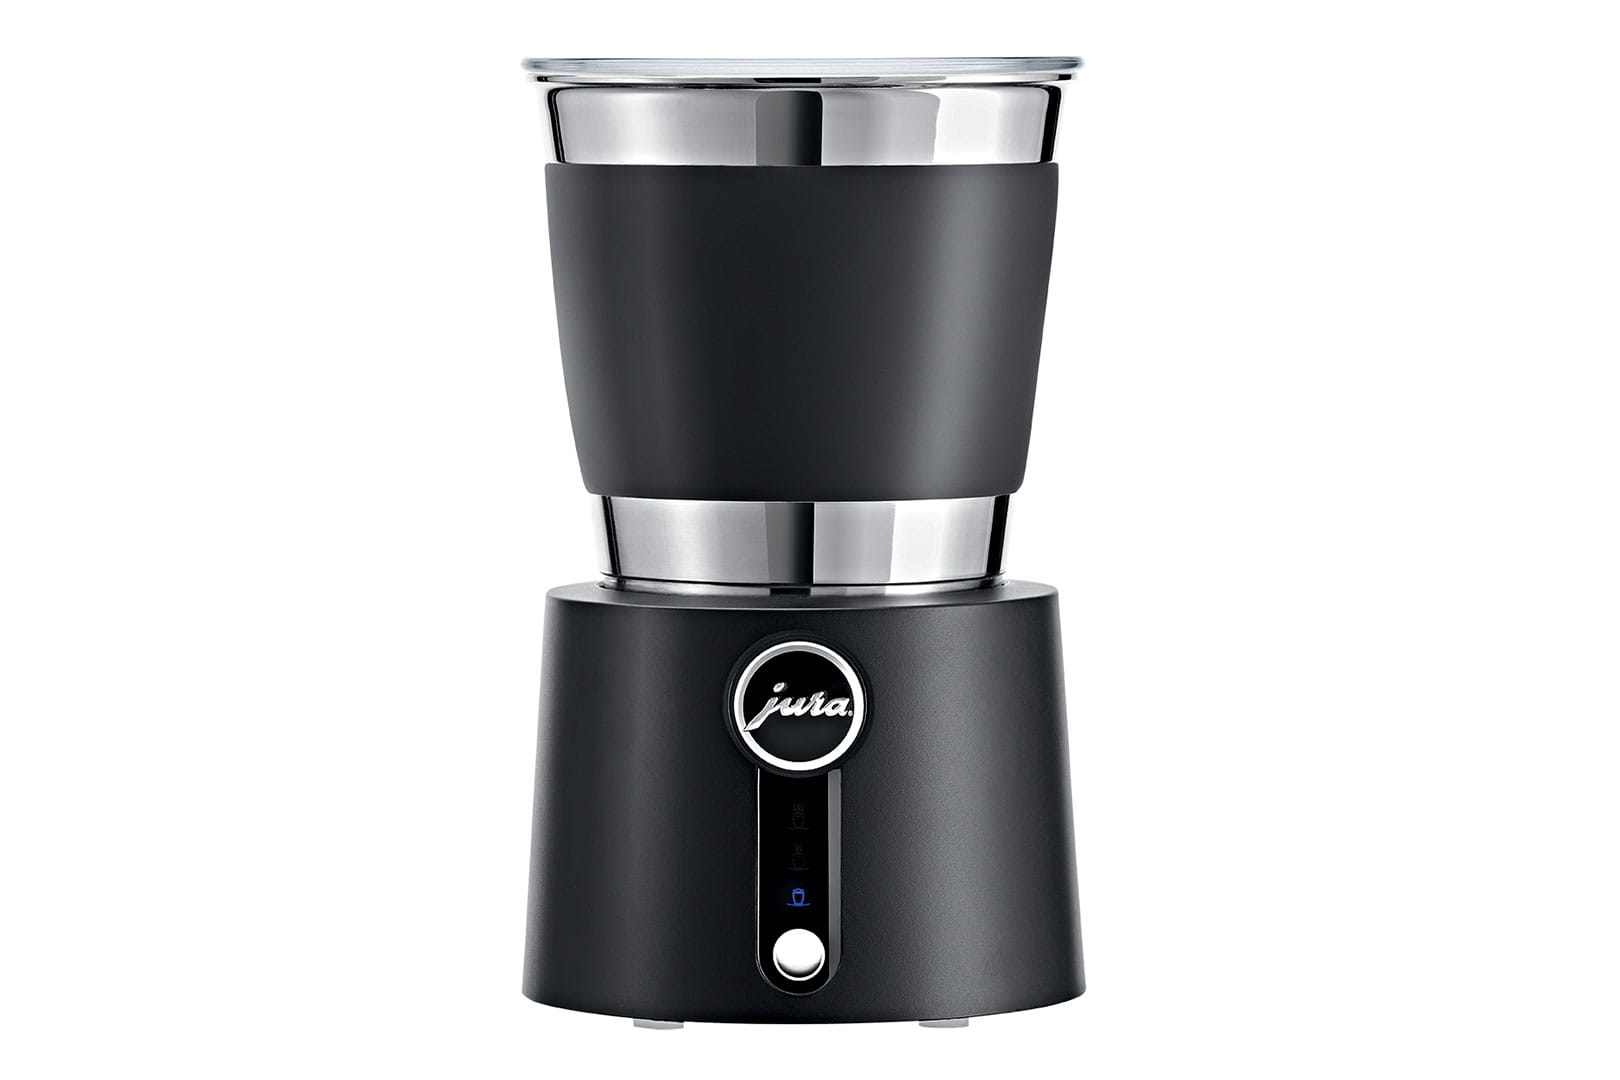 https://mx.jura.com/-/media/global/images/home-products/milk-frother/image-gallery-milk-frother-hot-and-cold/milkfrother1.jpg